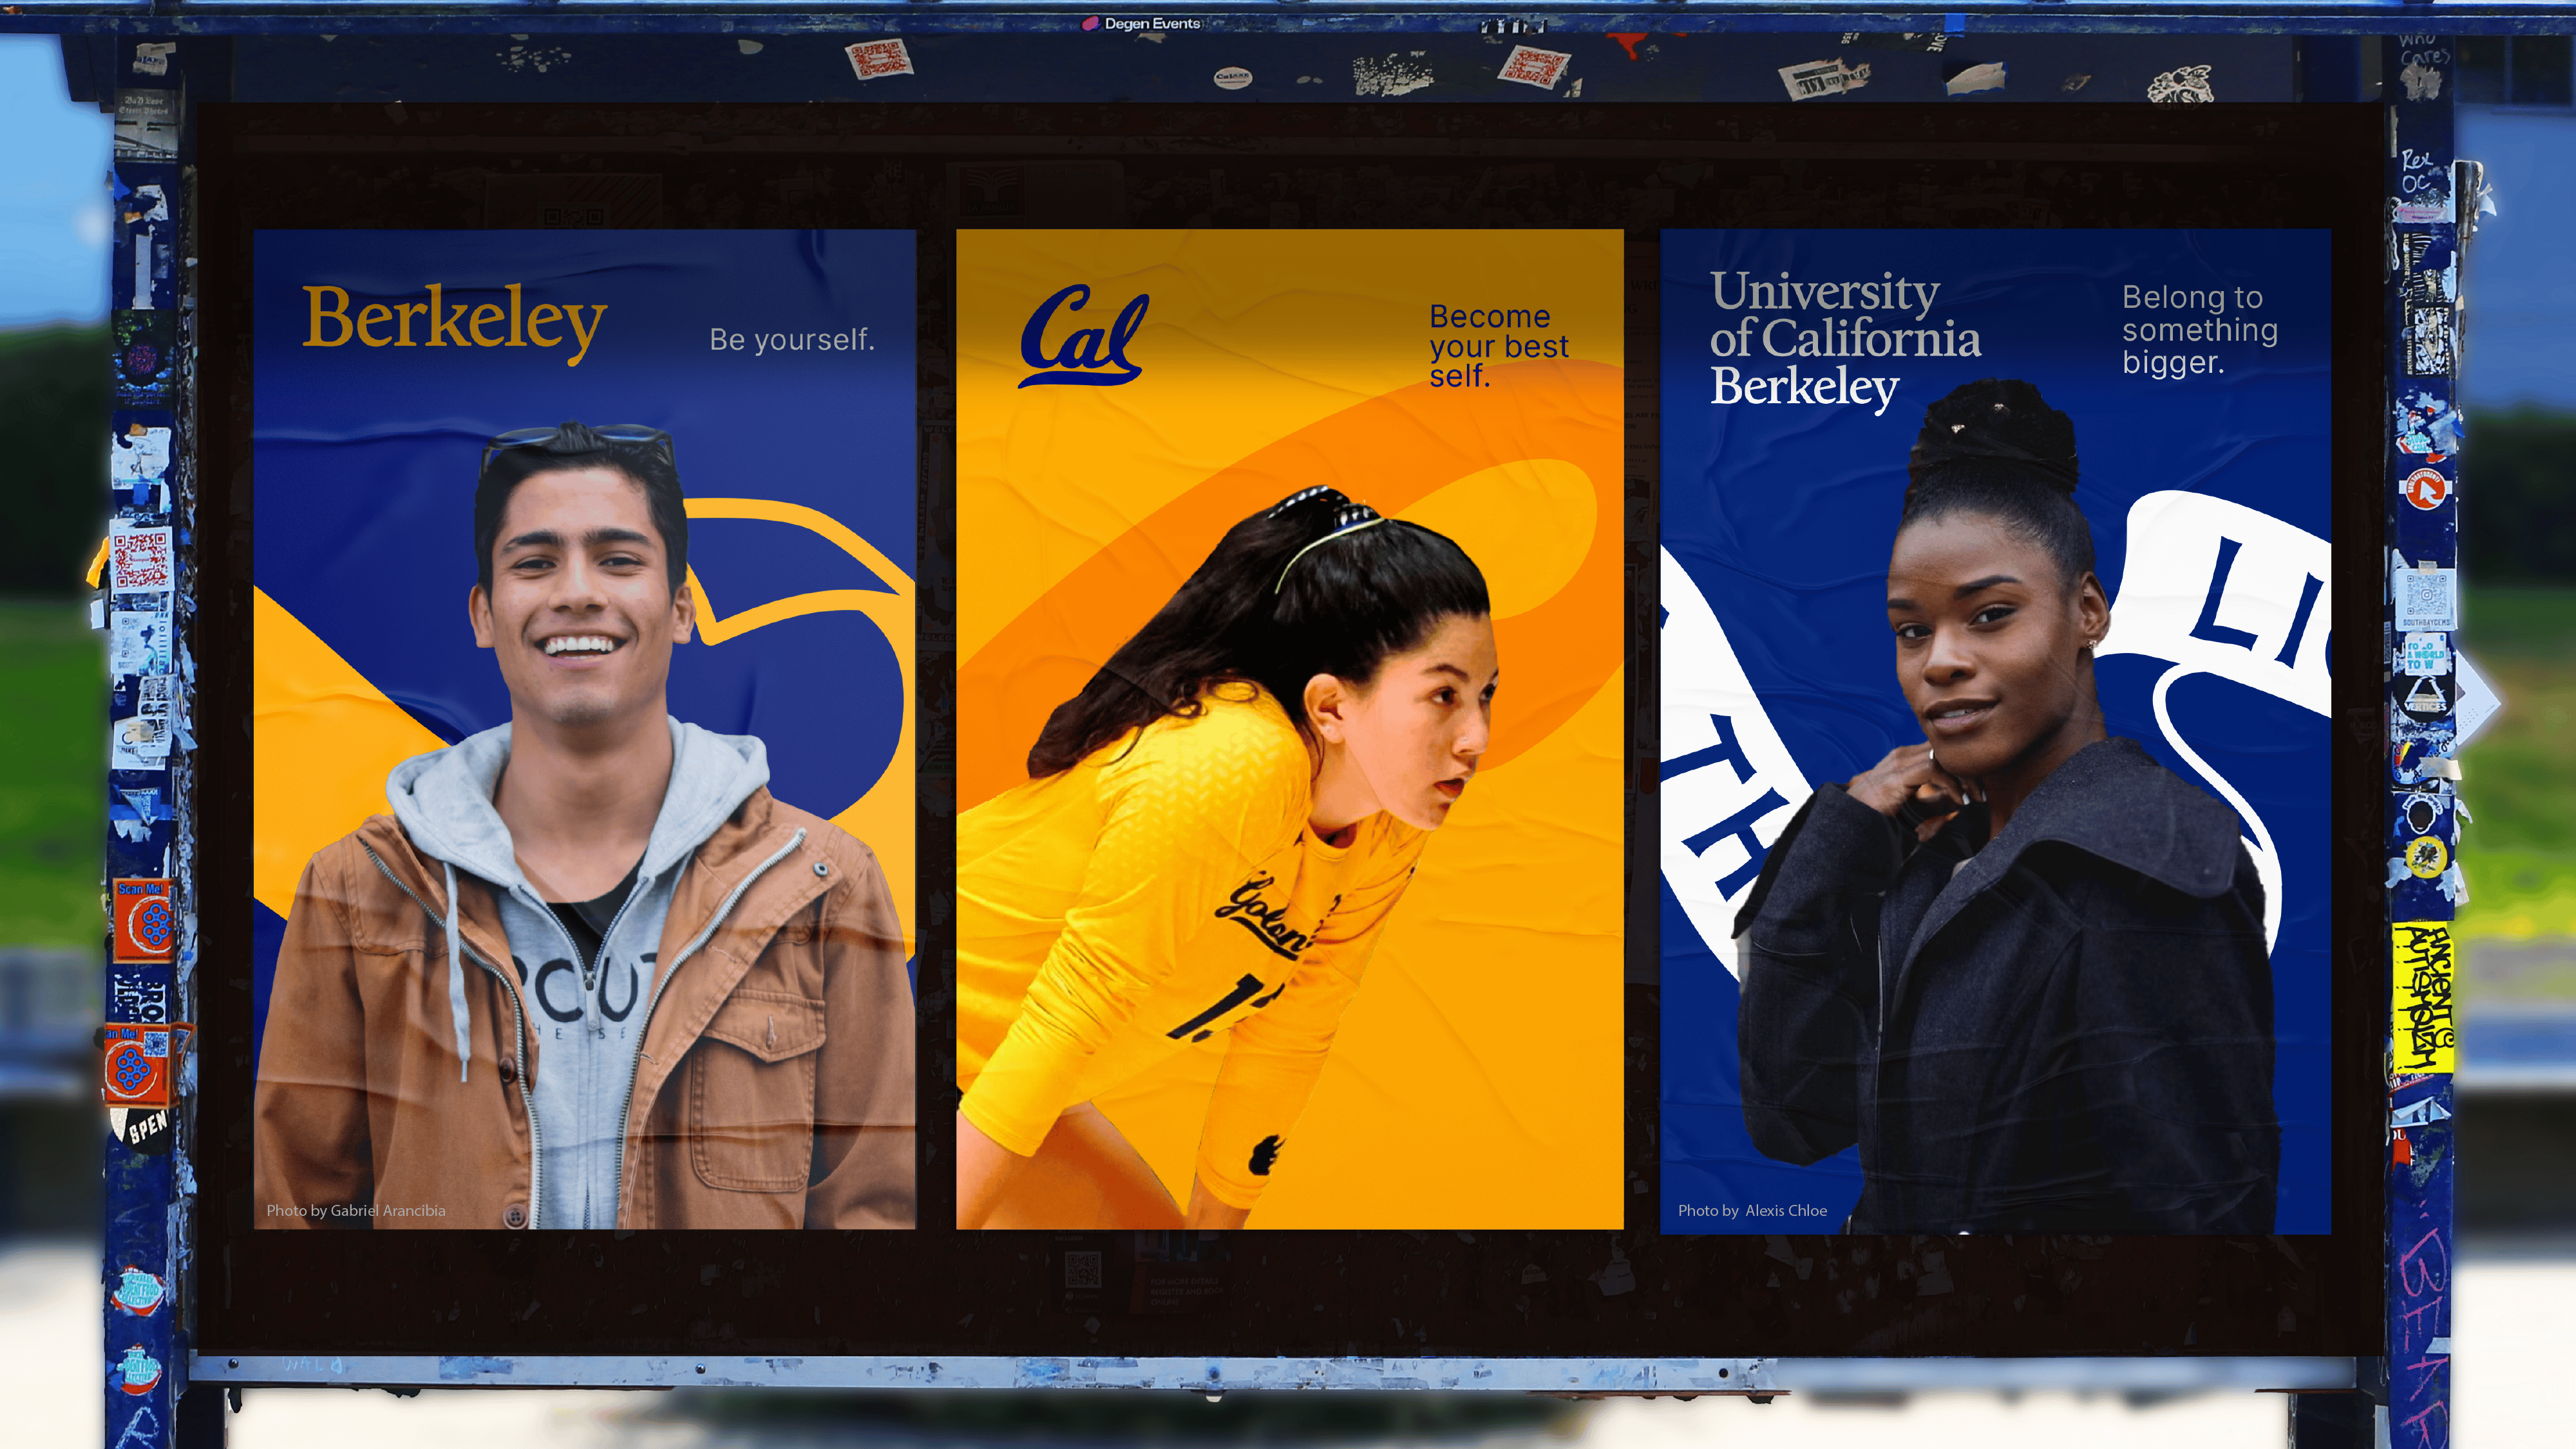 An artist rendering showing a three-paneled display of blue and gold brand images for Cal and UC Berkeley that signals the new similarities between the academic 